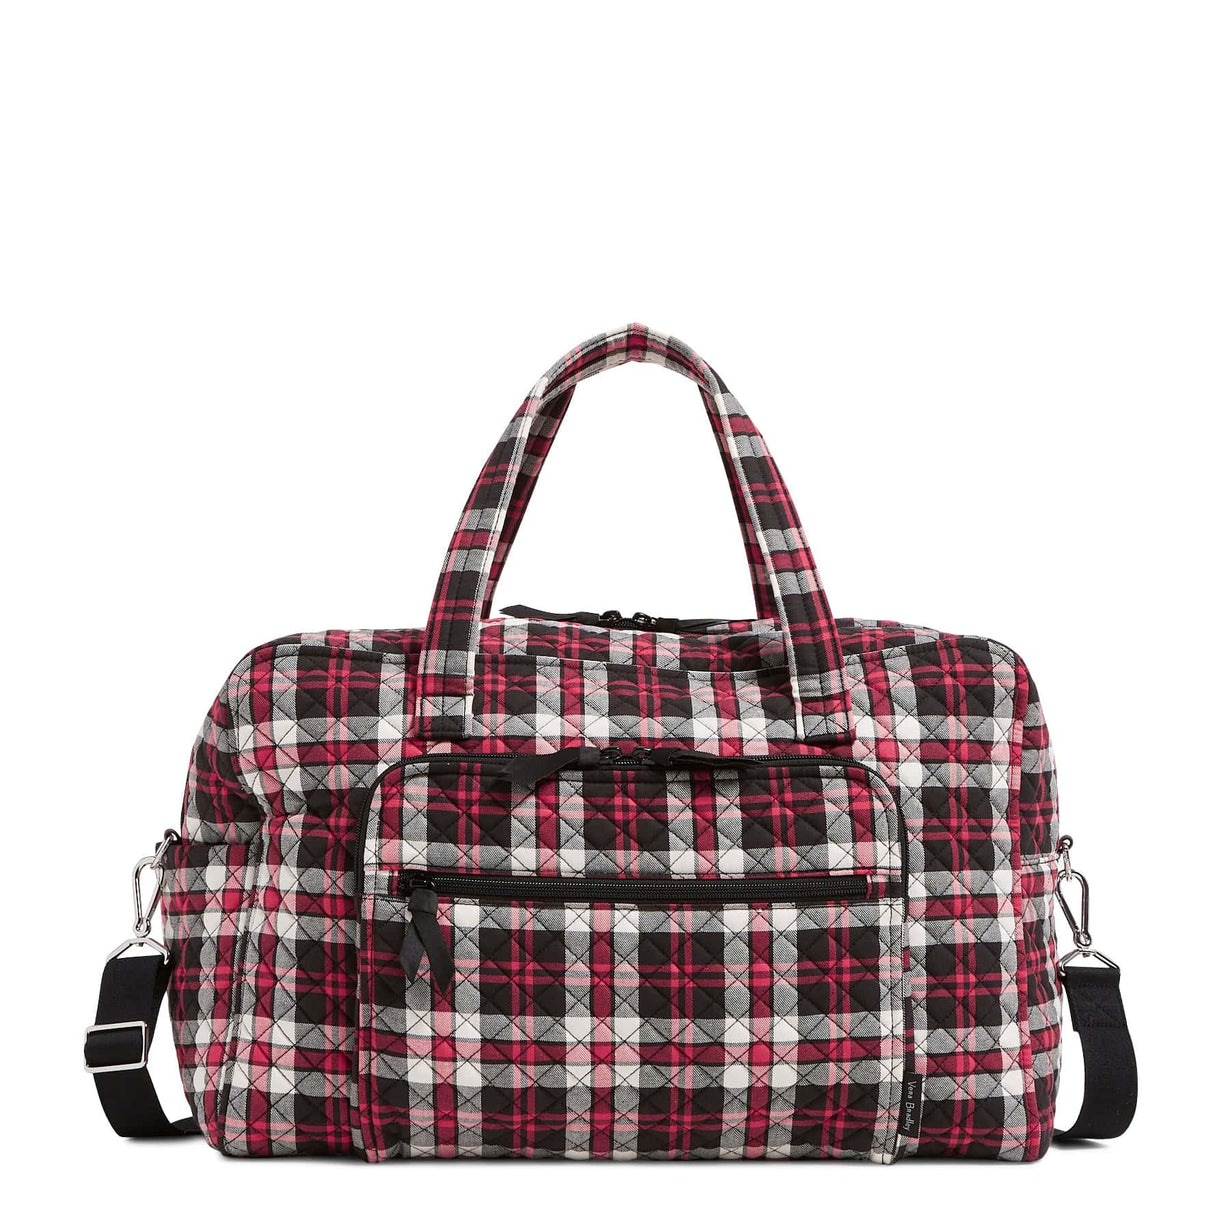 Plaid Weekender Bag Duffle Bag For Women Large Travel Tote Bag Overnight  Weekend Bags With Shoulder Strap(red)